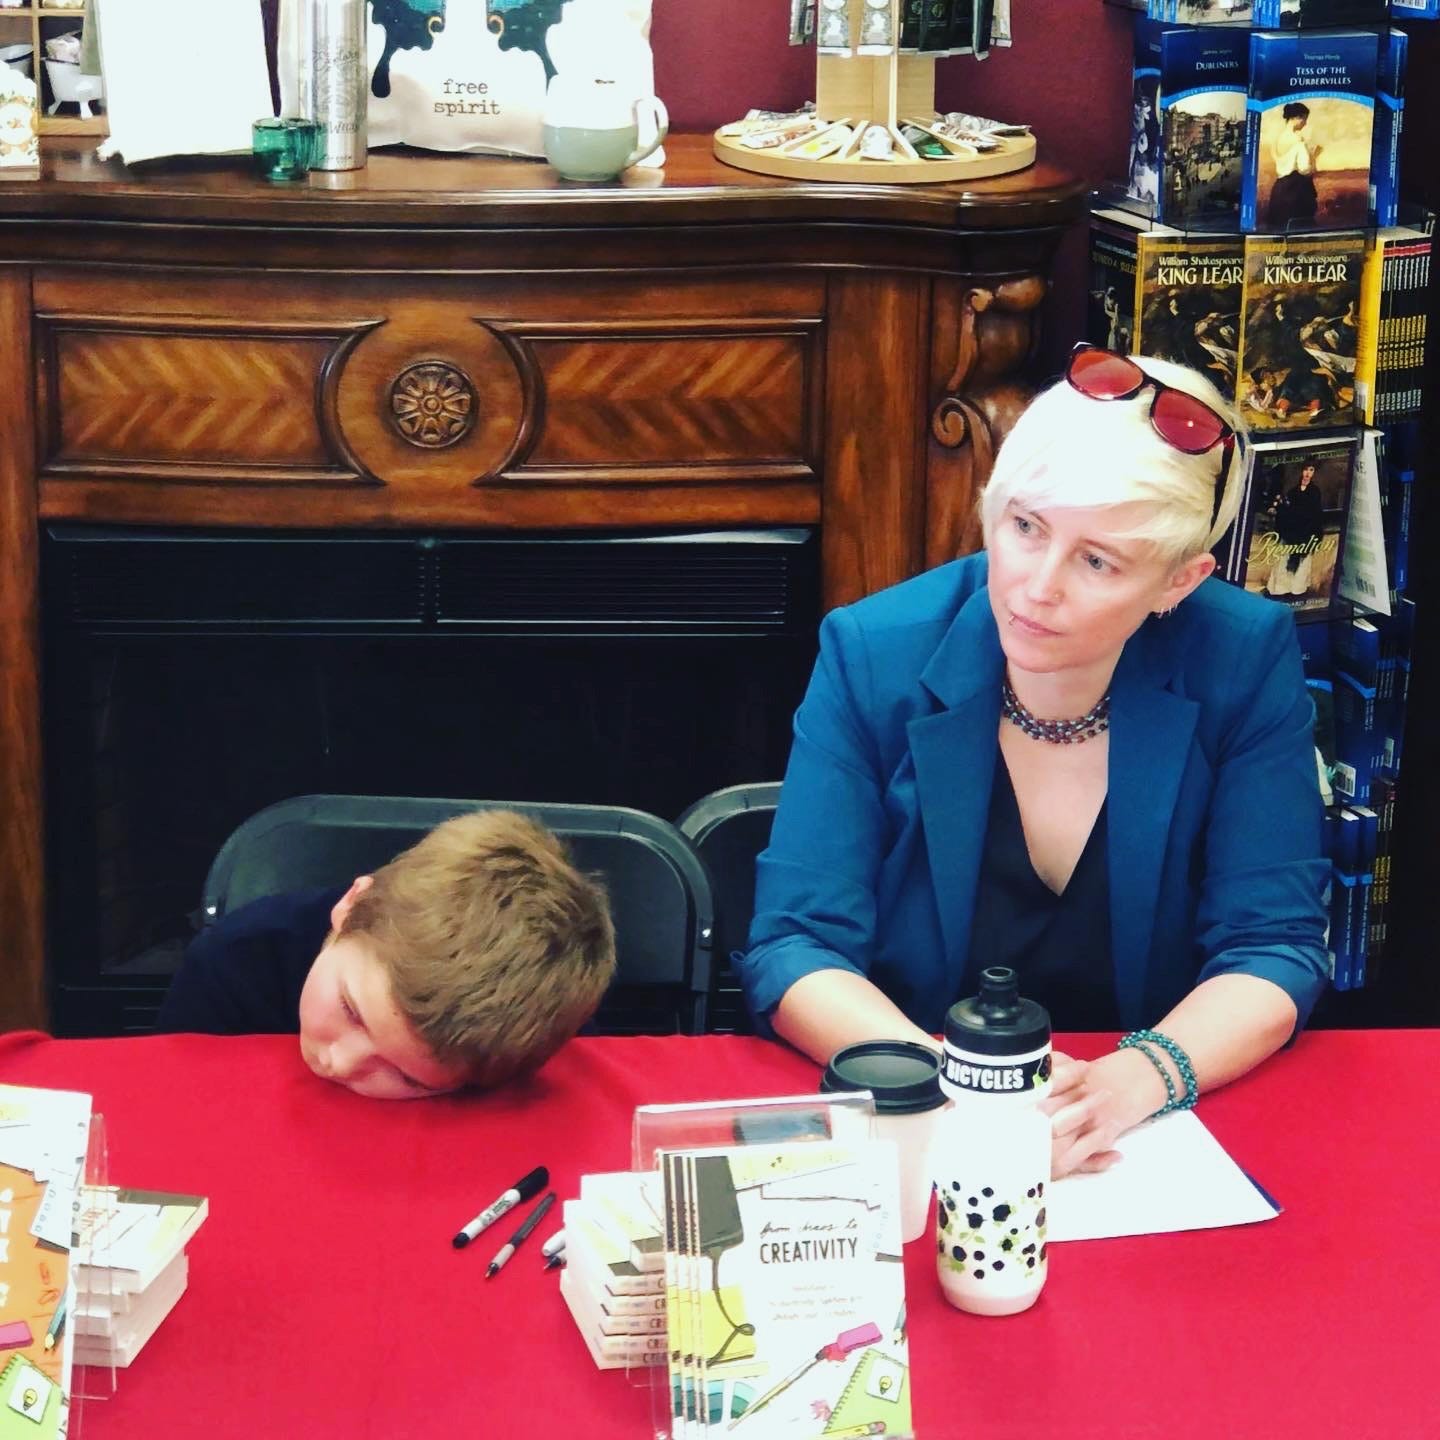 Jessie at a bookstore leading a workshop while her nephew is bored out of his mind beside her